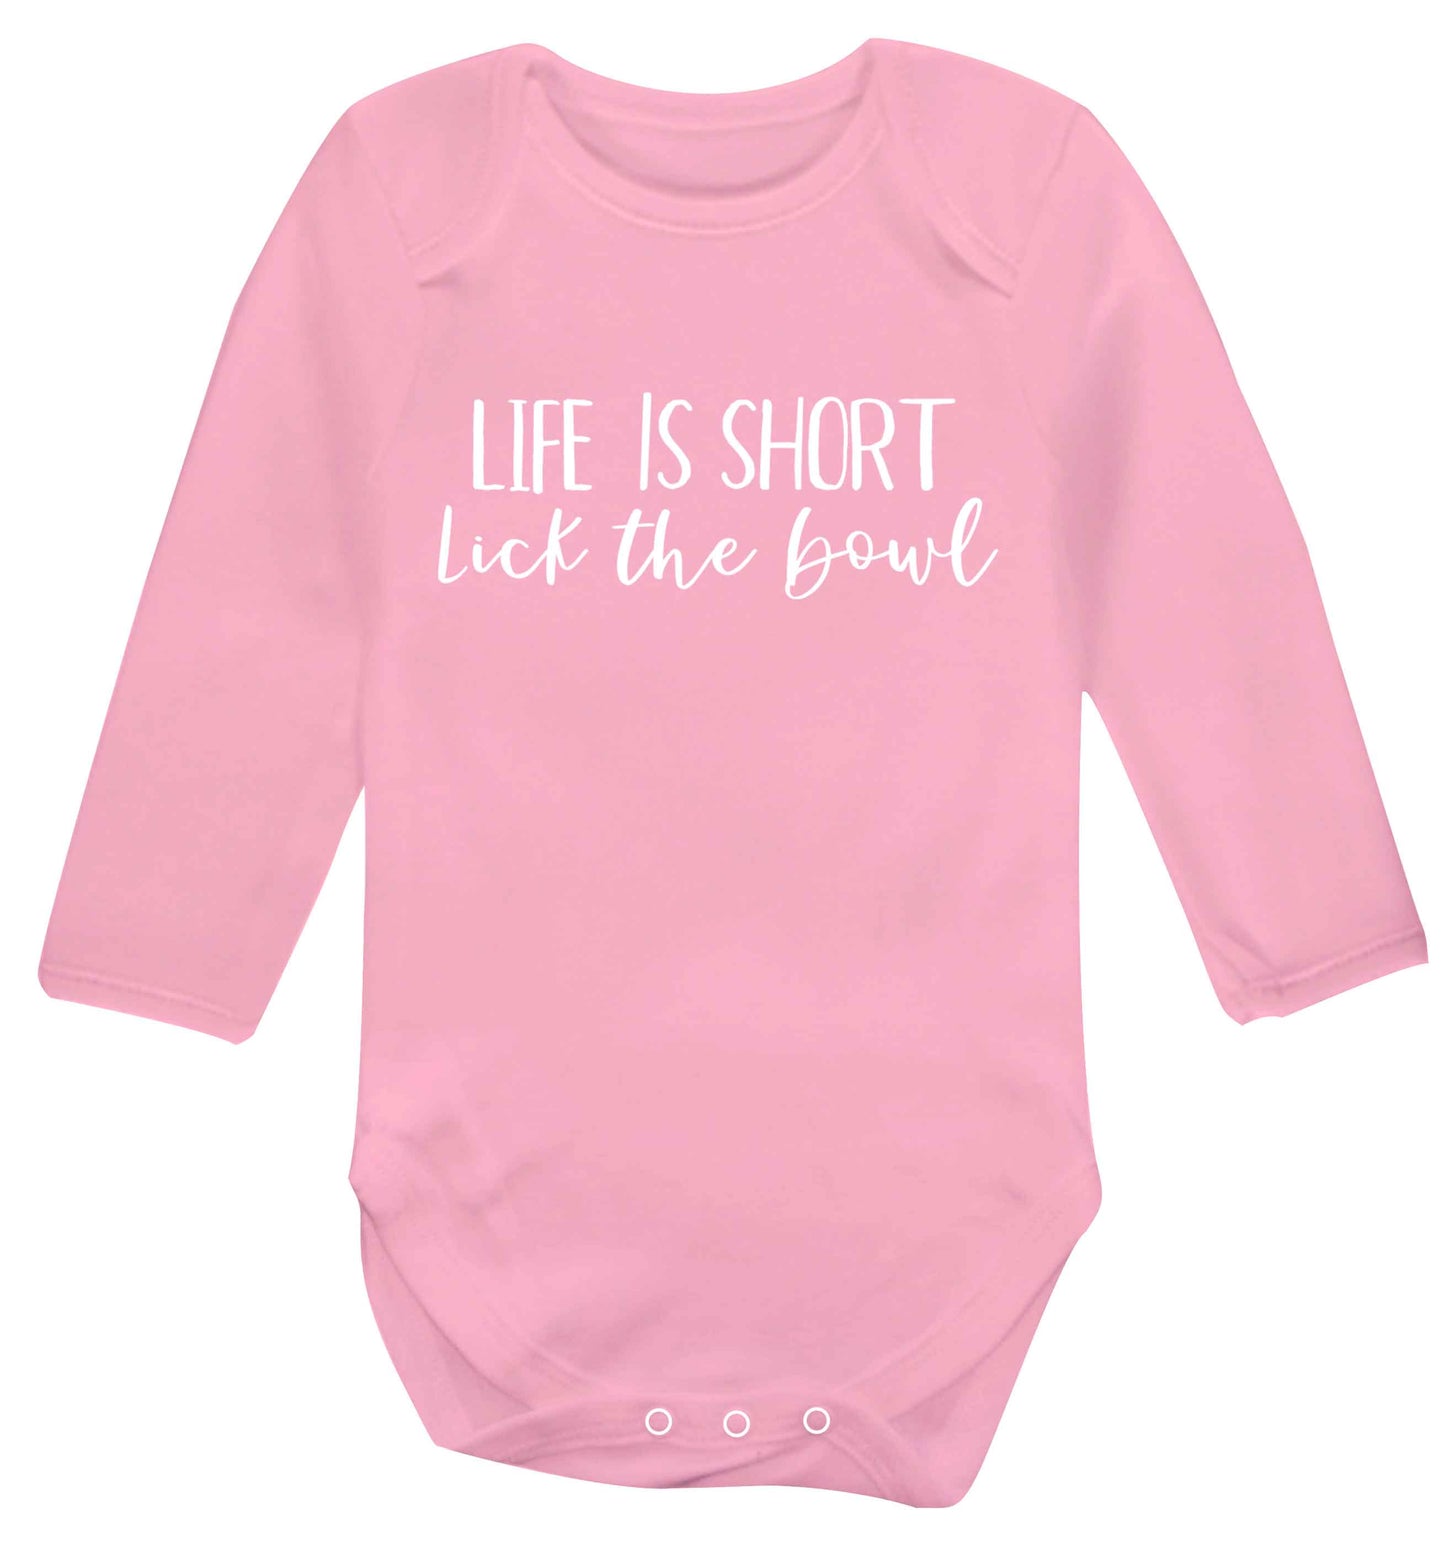 Life is short lick the bowl Baby Vest long sleeved pale pink 6-12 months